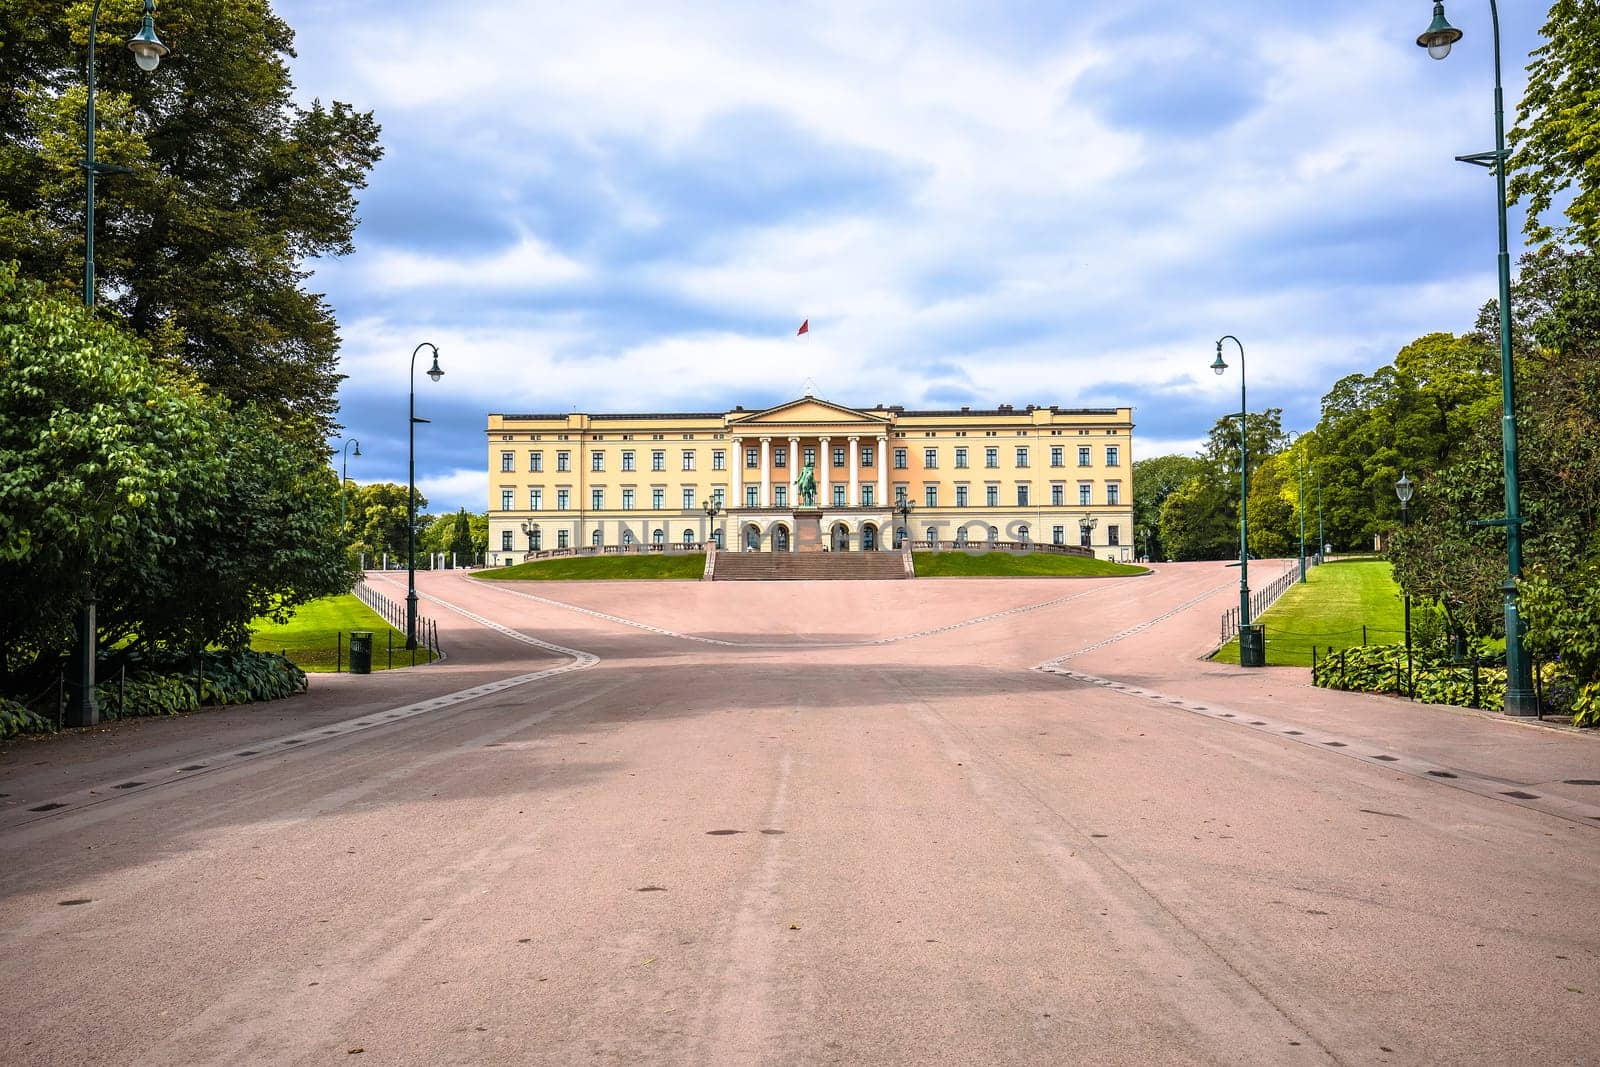 The Royal Palace of Norway in Oslo view by xbrchx